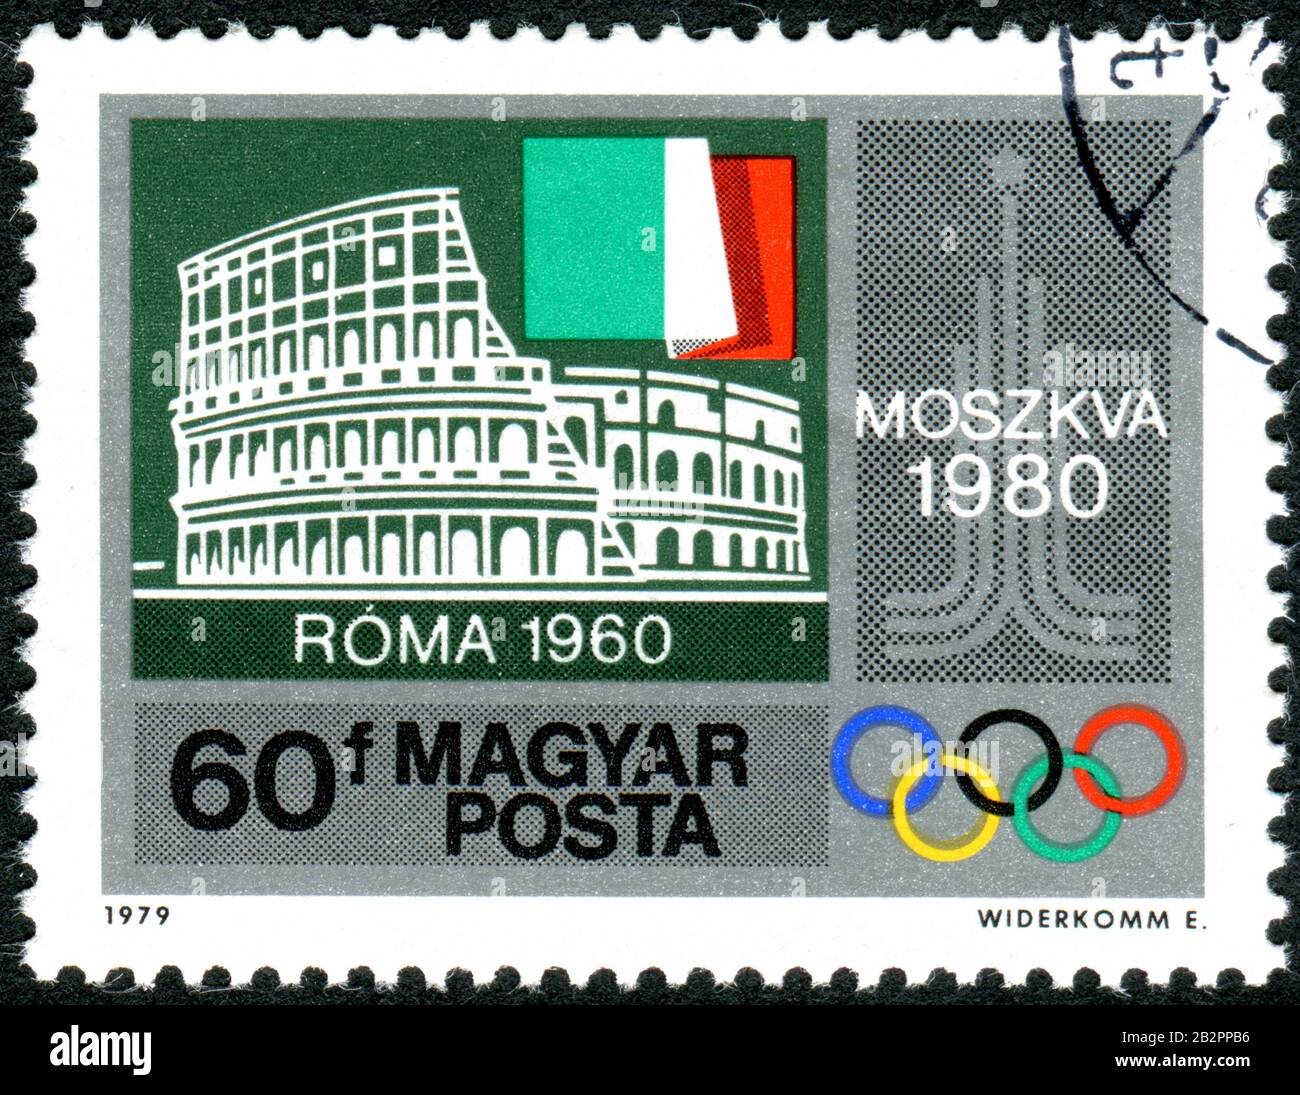 HUNGARY - CIRCA 1979: A stamp printed in Hungary, depicted Colosseum, Rome, Italian flag, Moscow '80 Emblem, circa 1979 Stock Photo